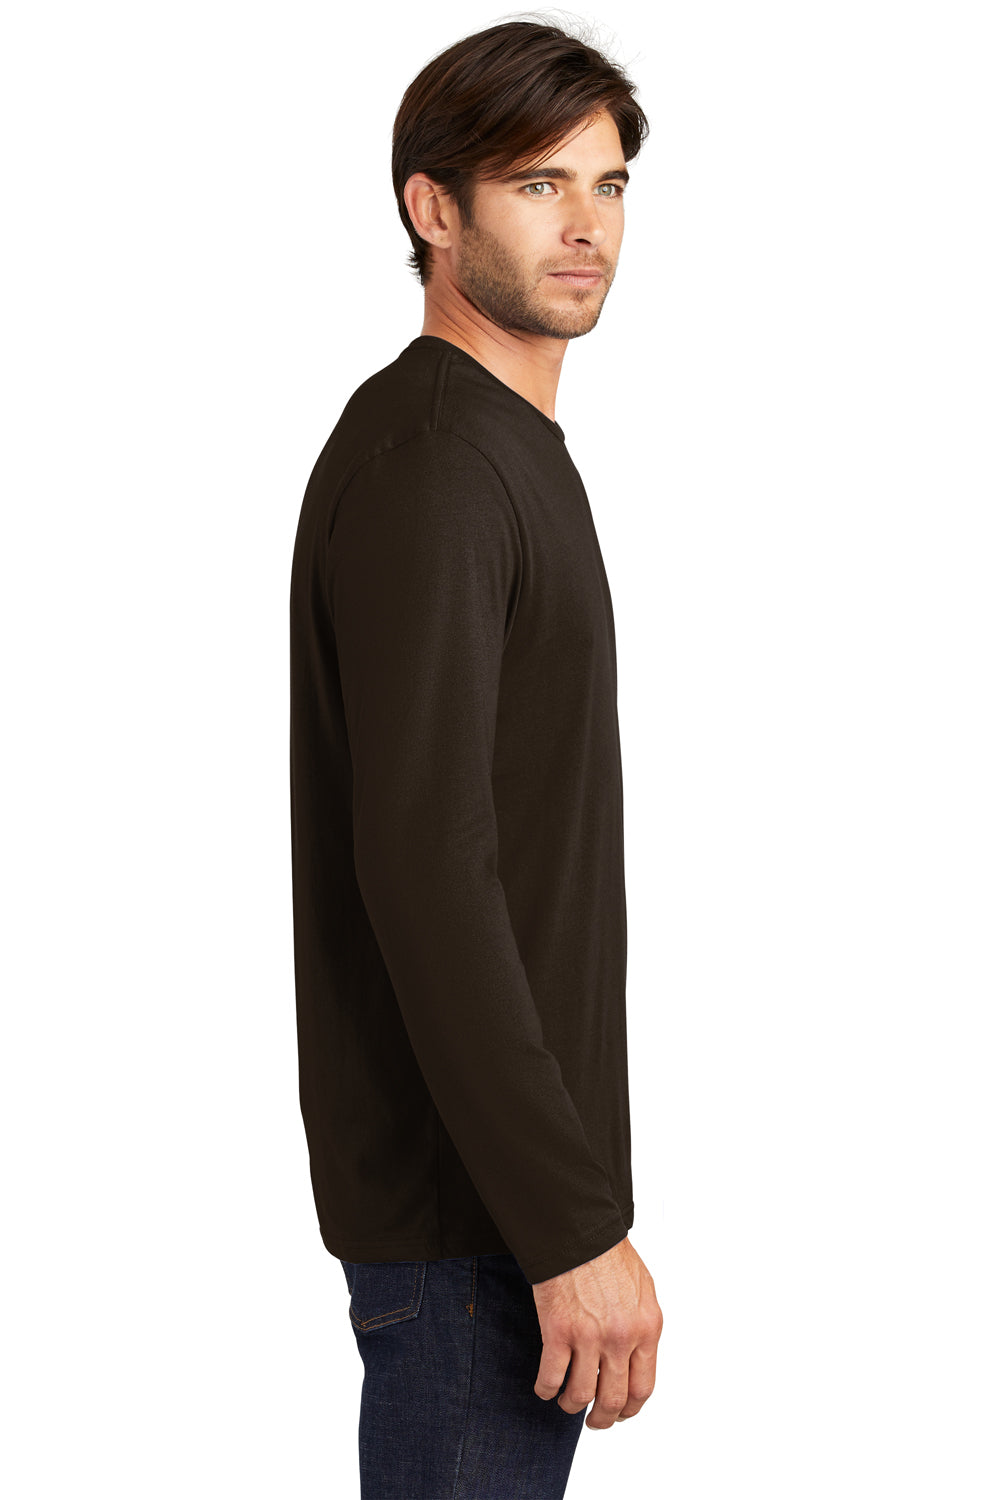 District DT105 Mens Perfect Weight Long Sleeve Crewneck T-Shirt Espresso Brown Side